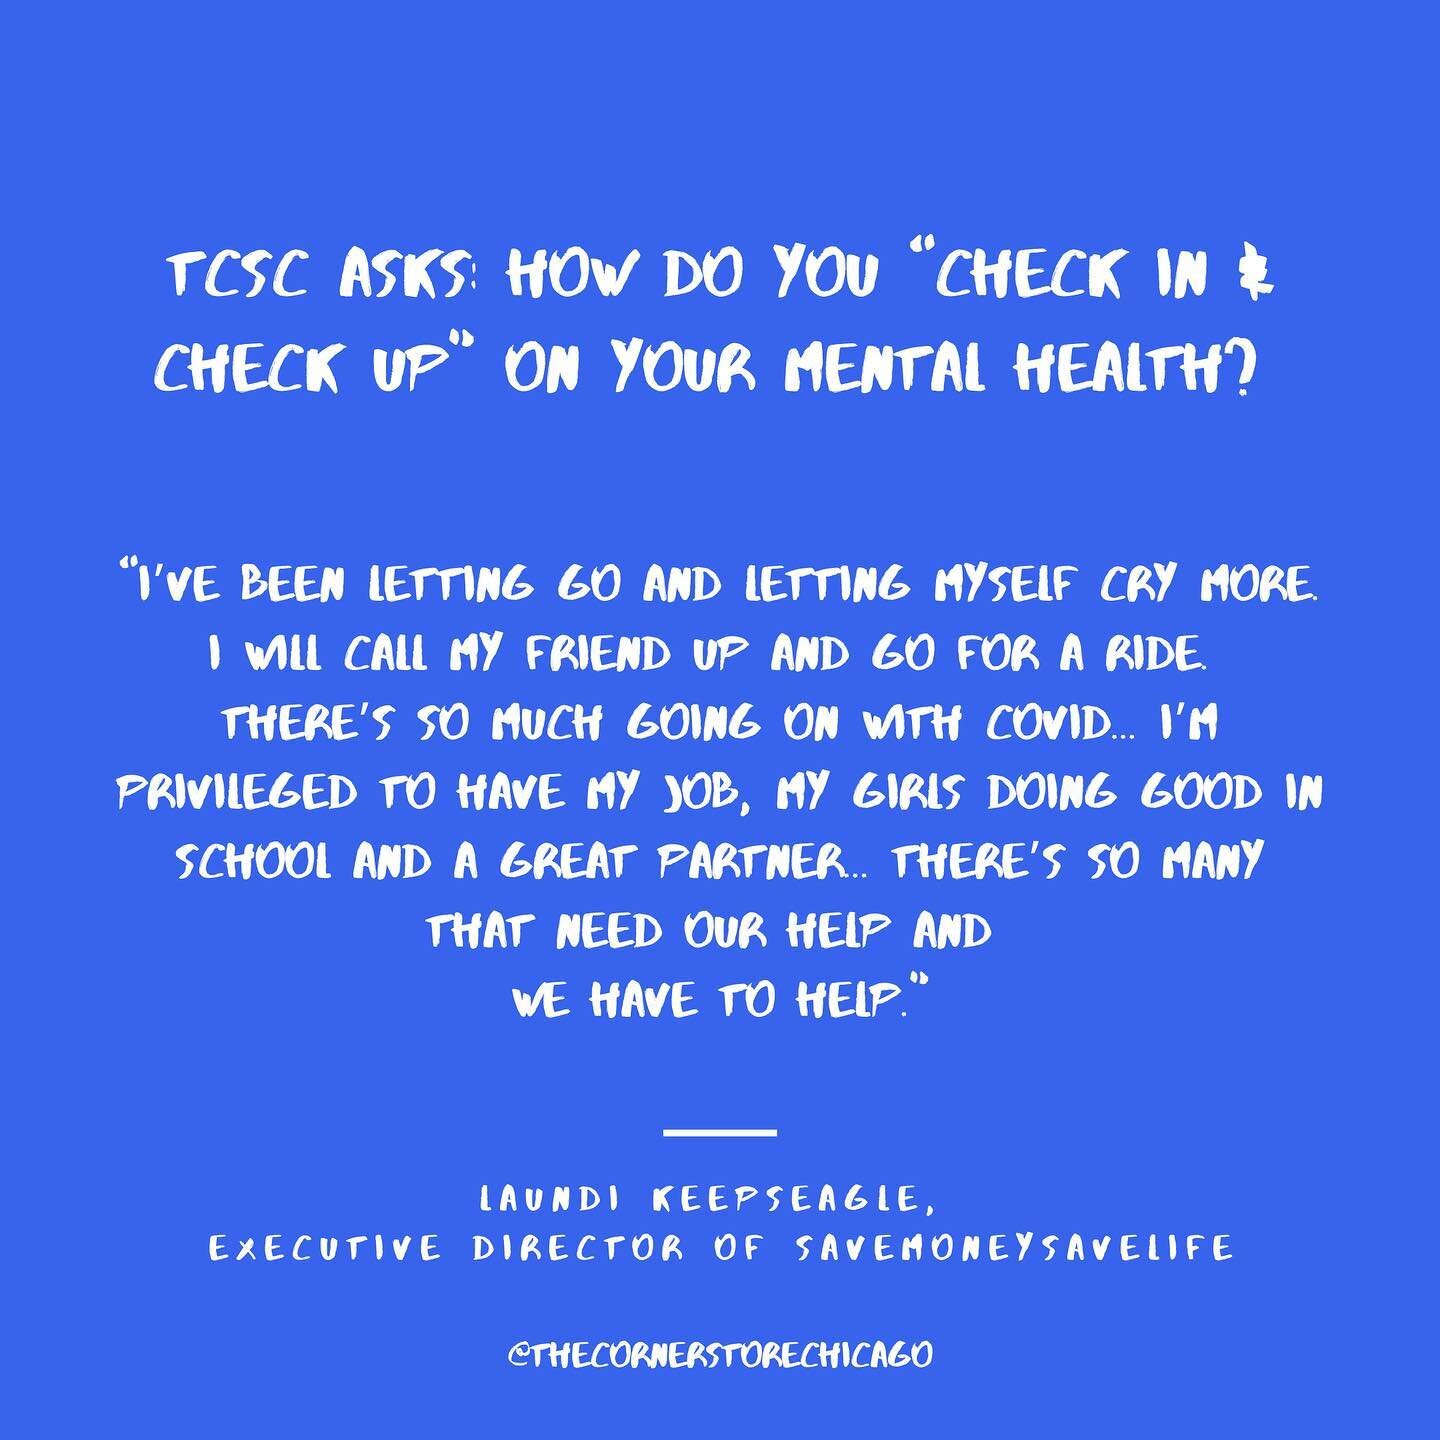 Happy Wednesday! How&rsquo;re y&rsquo;all feeling? Sending a huge THANK YOU to @lgkeepseagle for dropping so many 💎💎💎 and sharing what she does to &ldquo;Check In &amp; Check Up&rdquo; on her mental health. &bull;
&bull;
As the Executive Director 